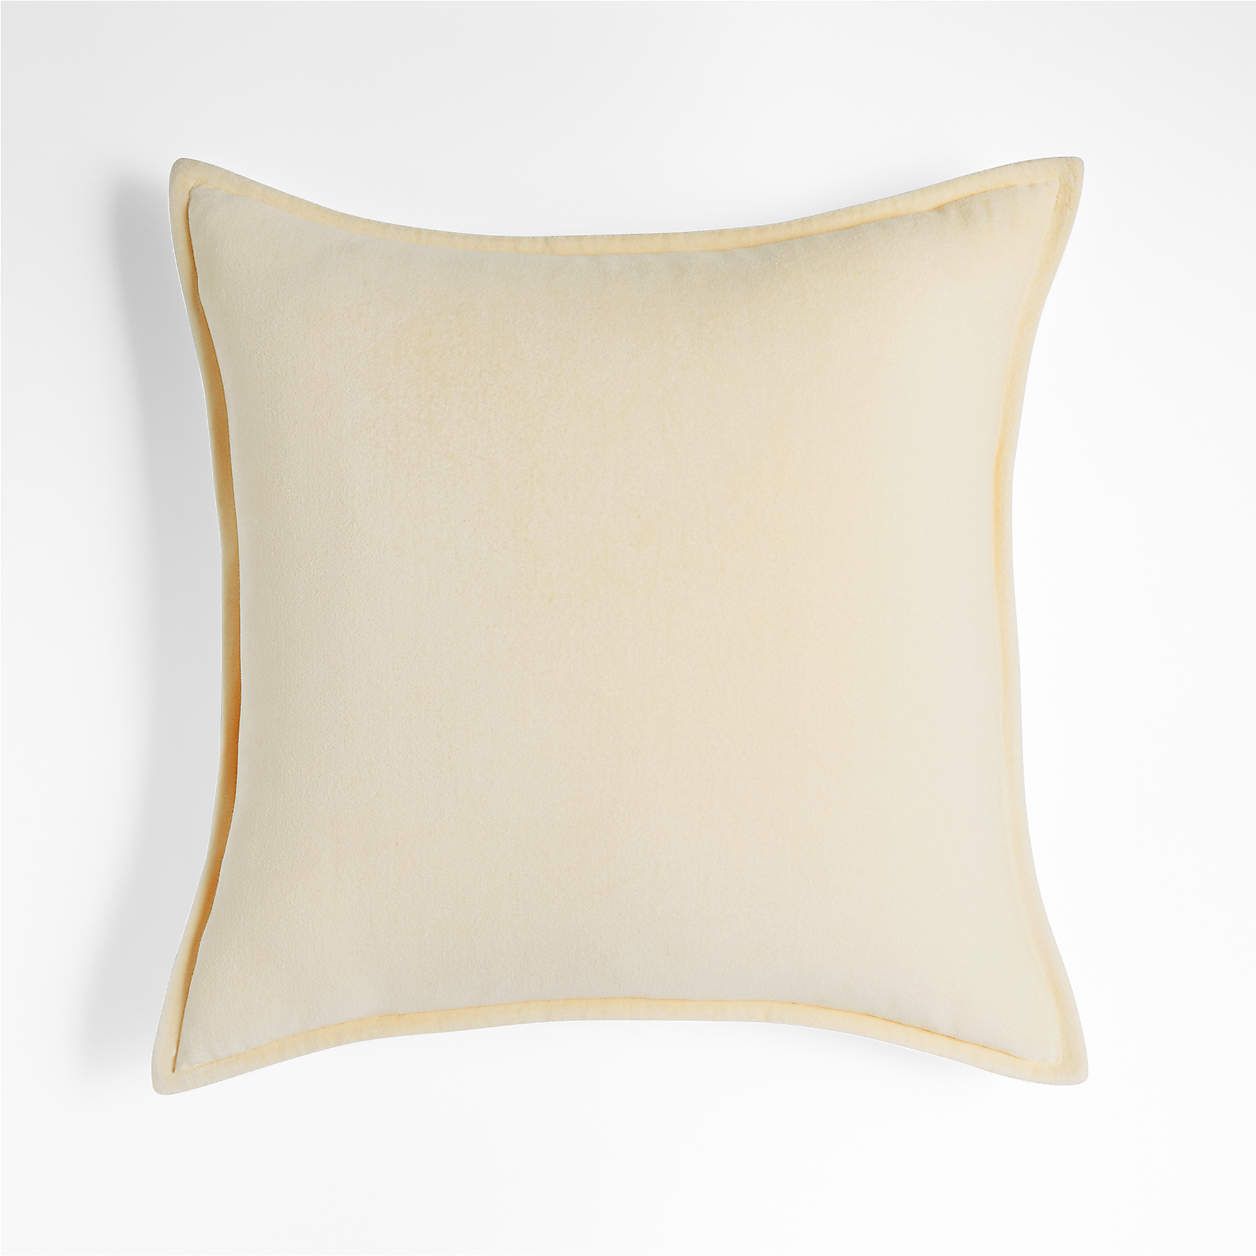 Cream 20" Washed Cotton Velvet Pillows | Crate and Barrel | Crate & Barrel